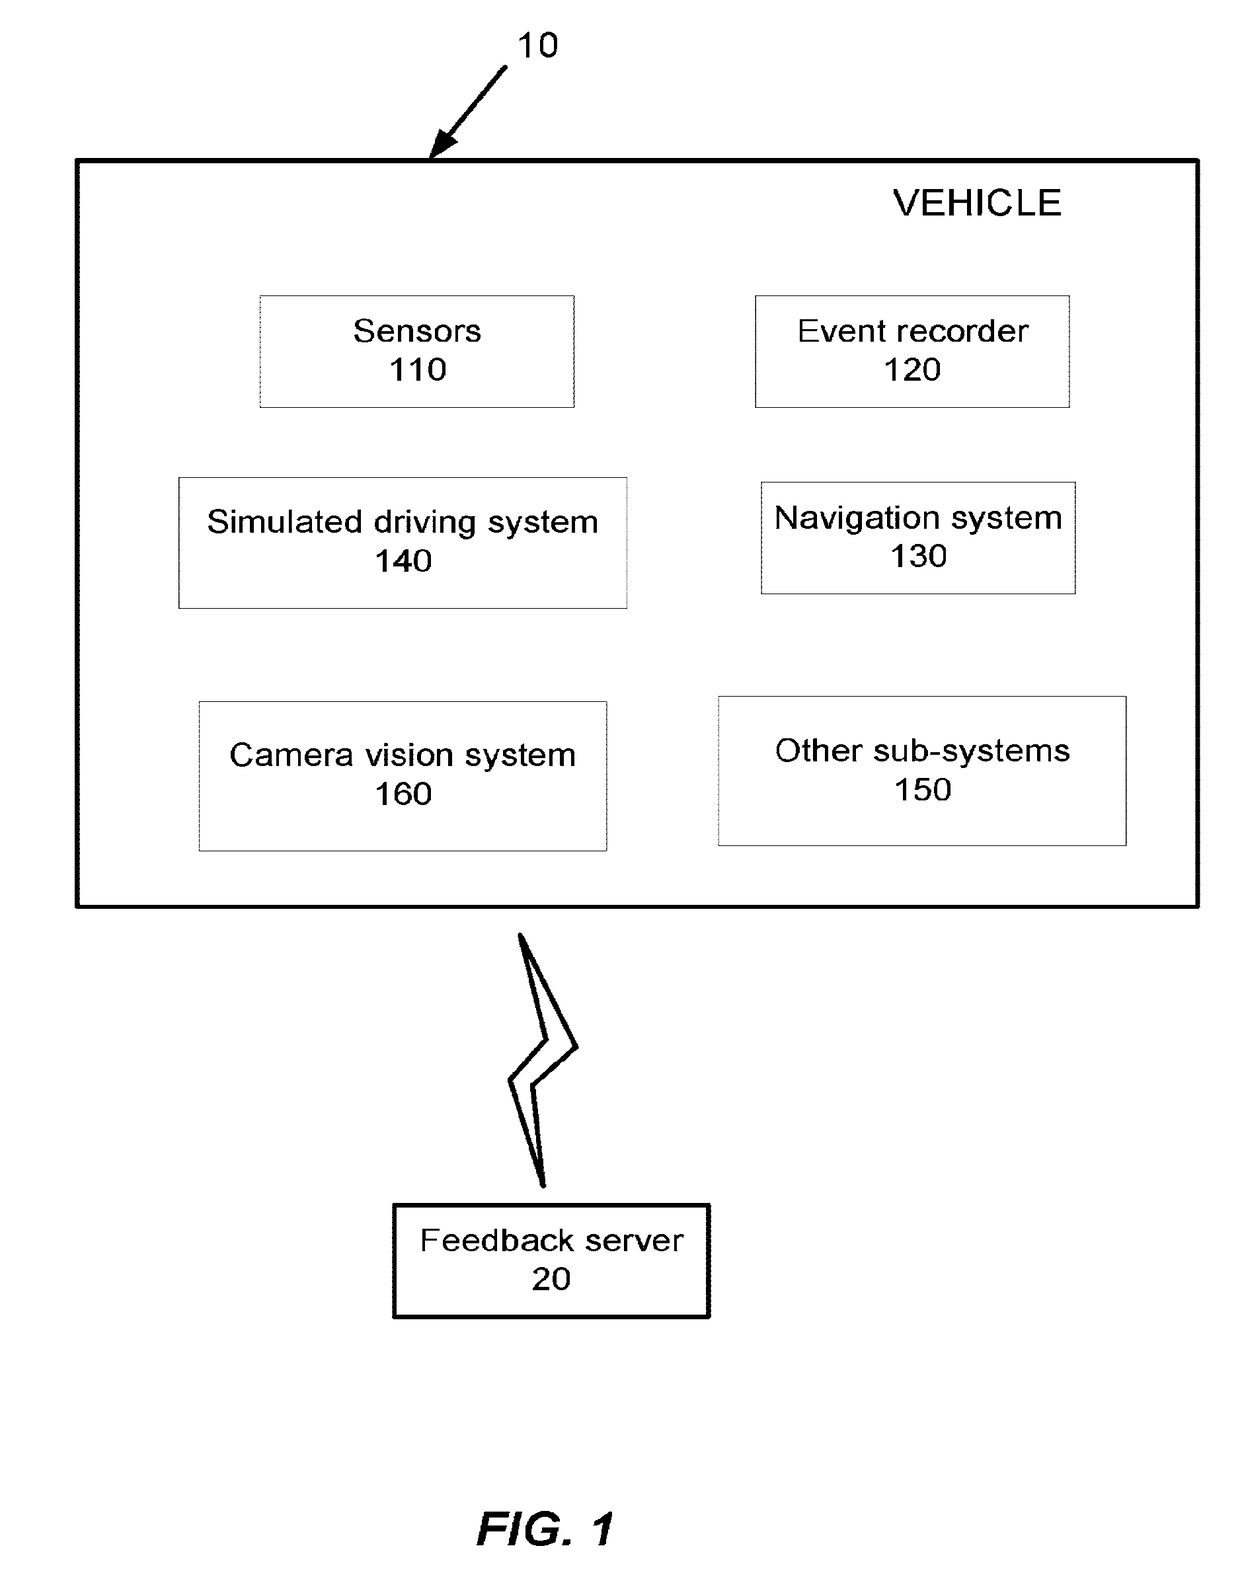 Driver and vehicle monitoring feedback system for an autonomous vehicle